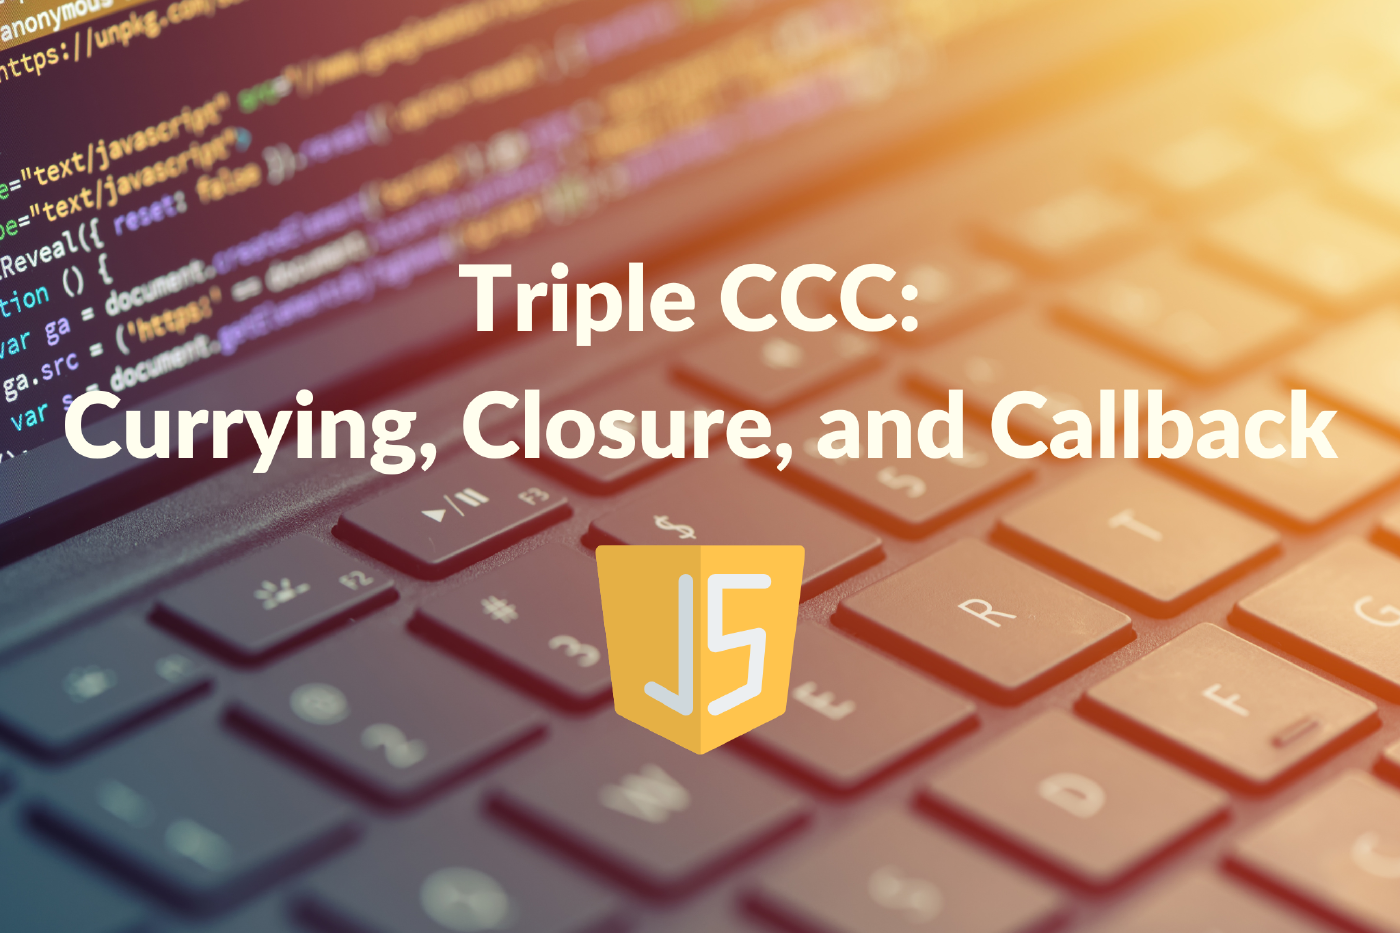 Triple CCC: Currying, Closure, and Callback in JavaScript